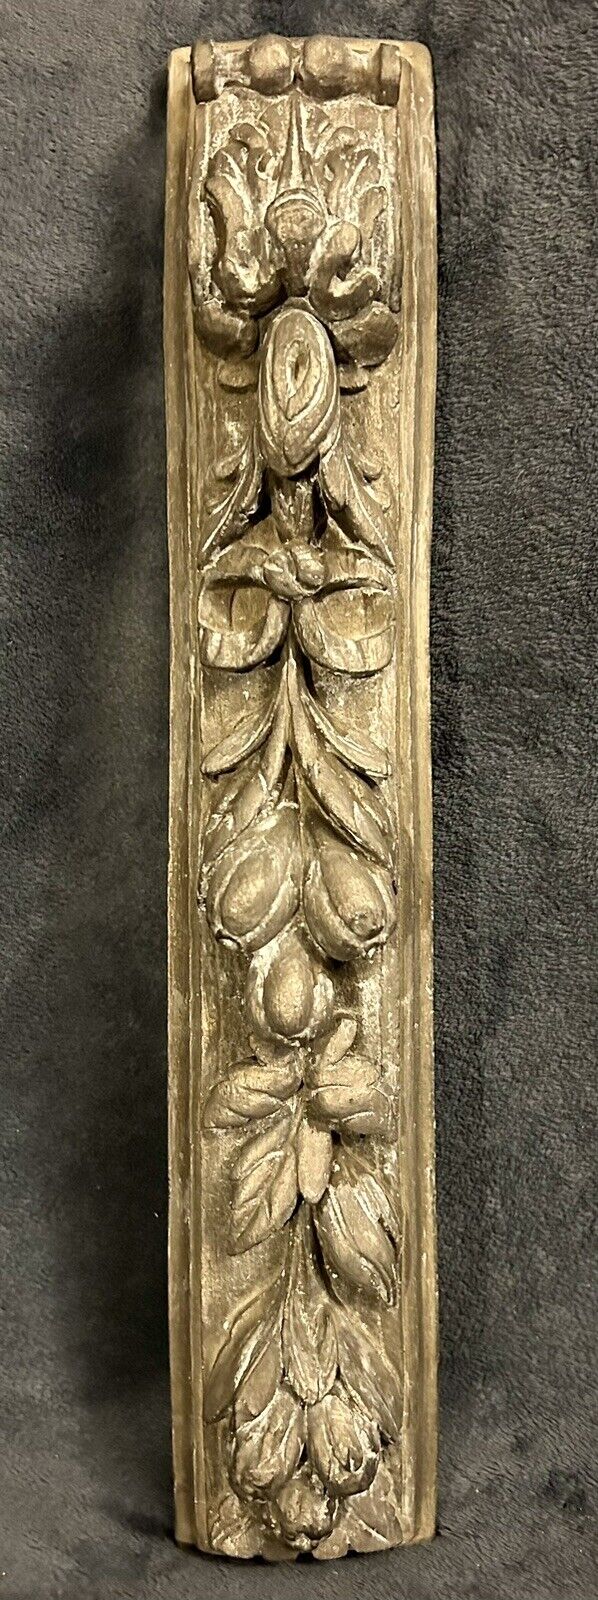 Early To Mid 20th-C French Concrete Garden Wall Sculpture Plaque 21.5”